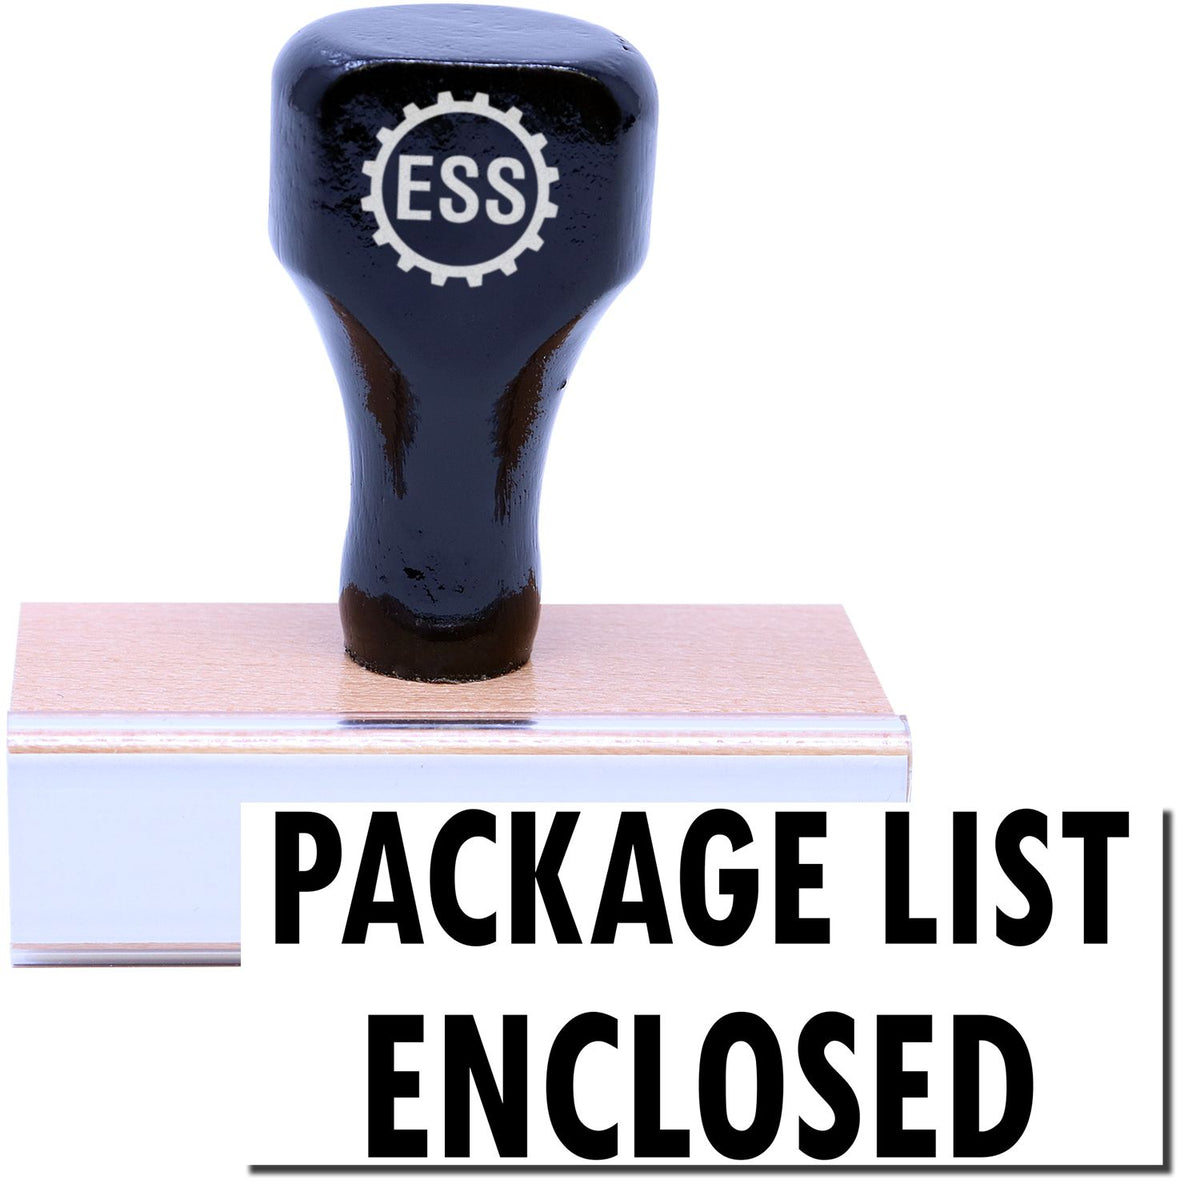 A stock office rubber stamp with a stamped image showing how the text &quot;PACKAGE LIST ENCLOSED&quot; in a large font is displayed after stamping.